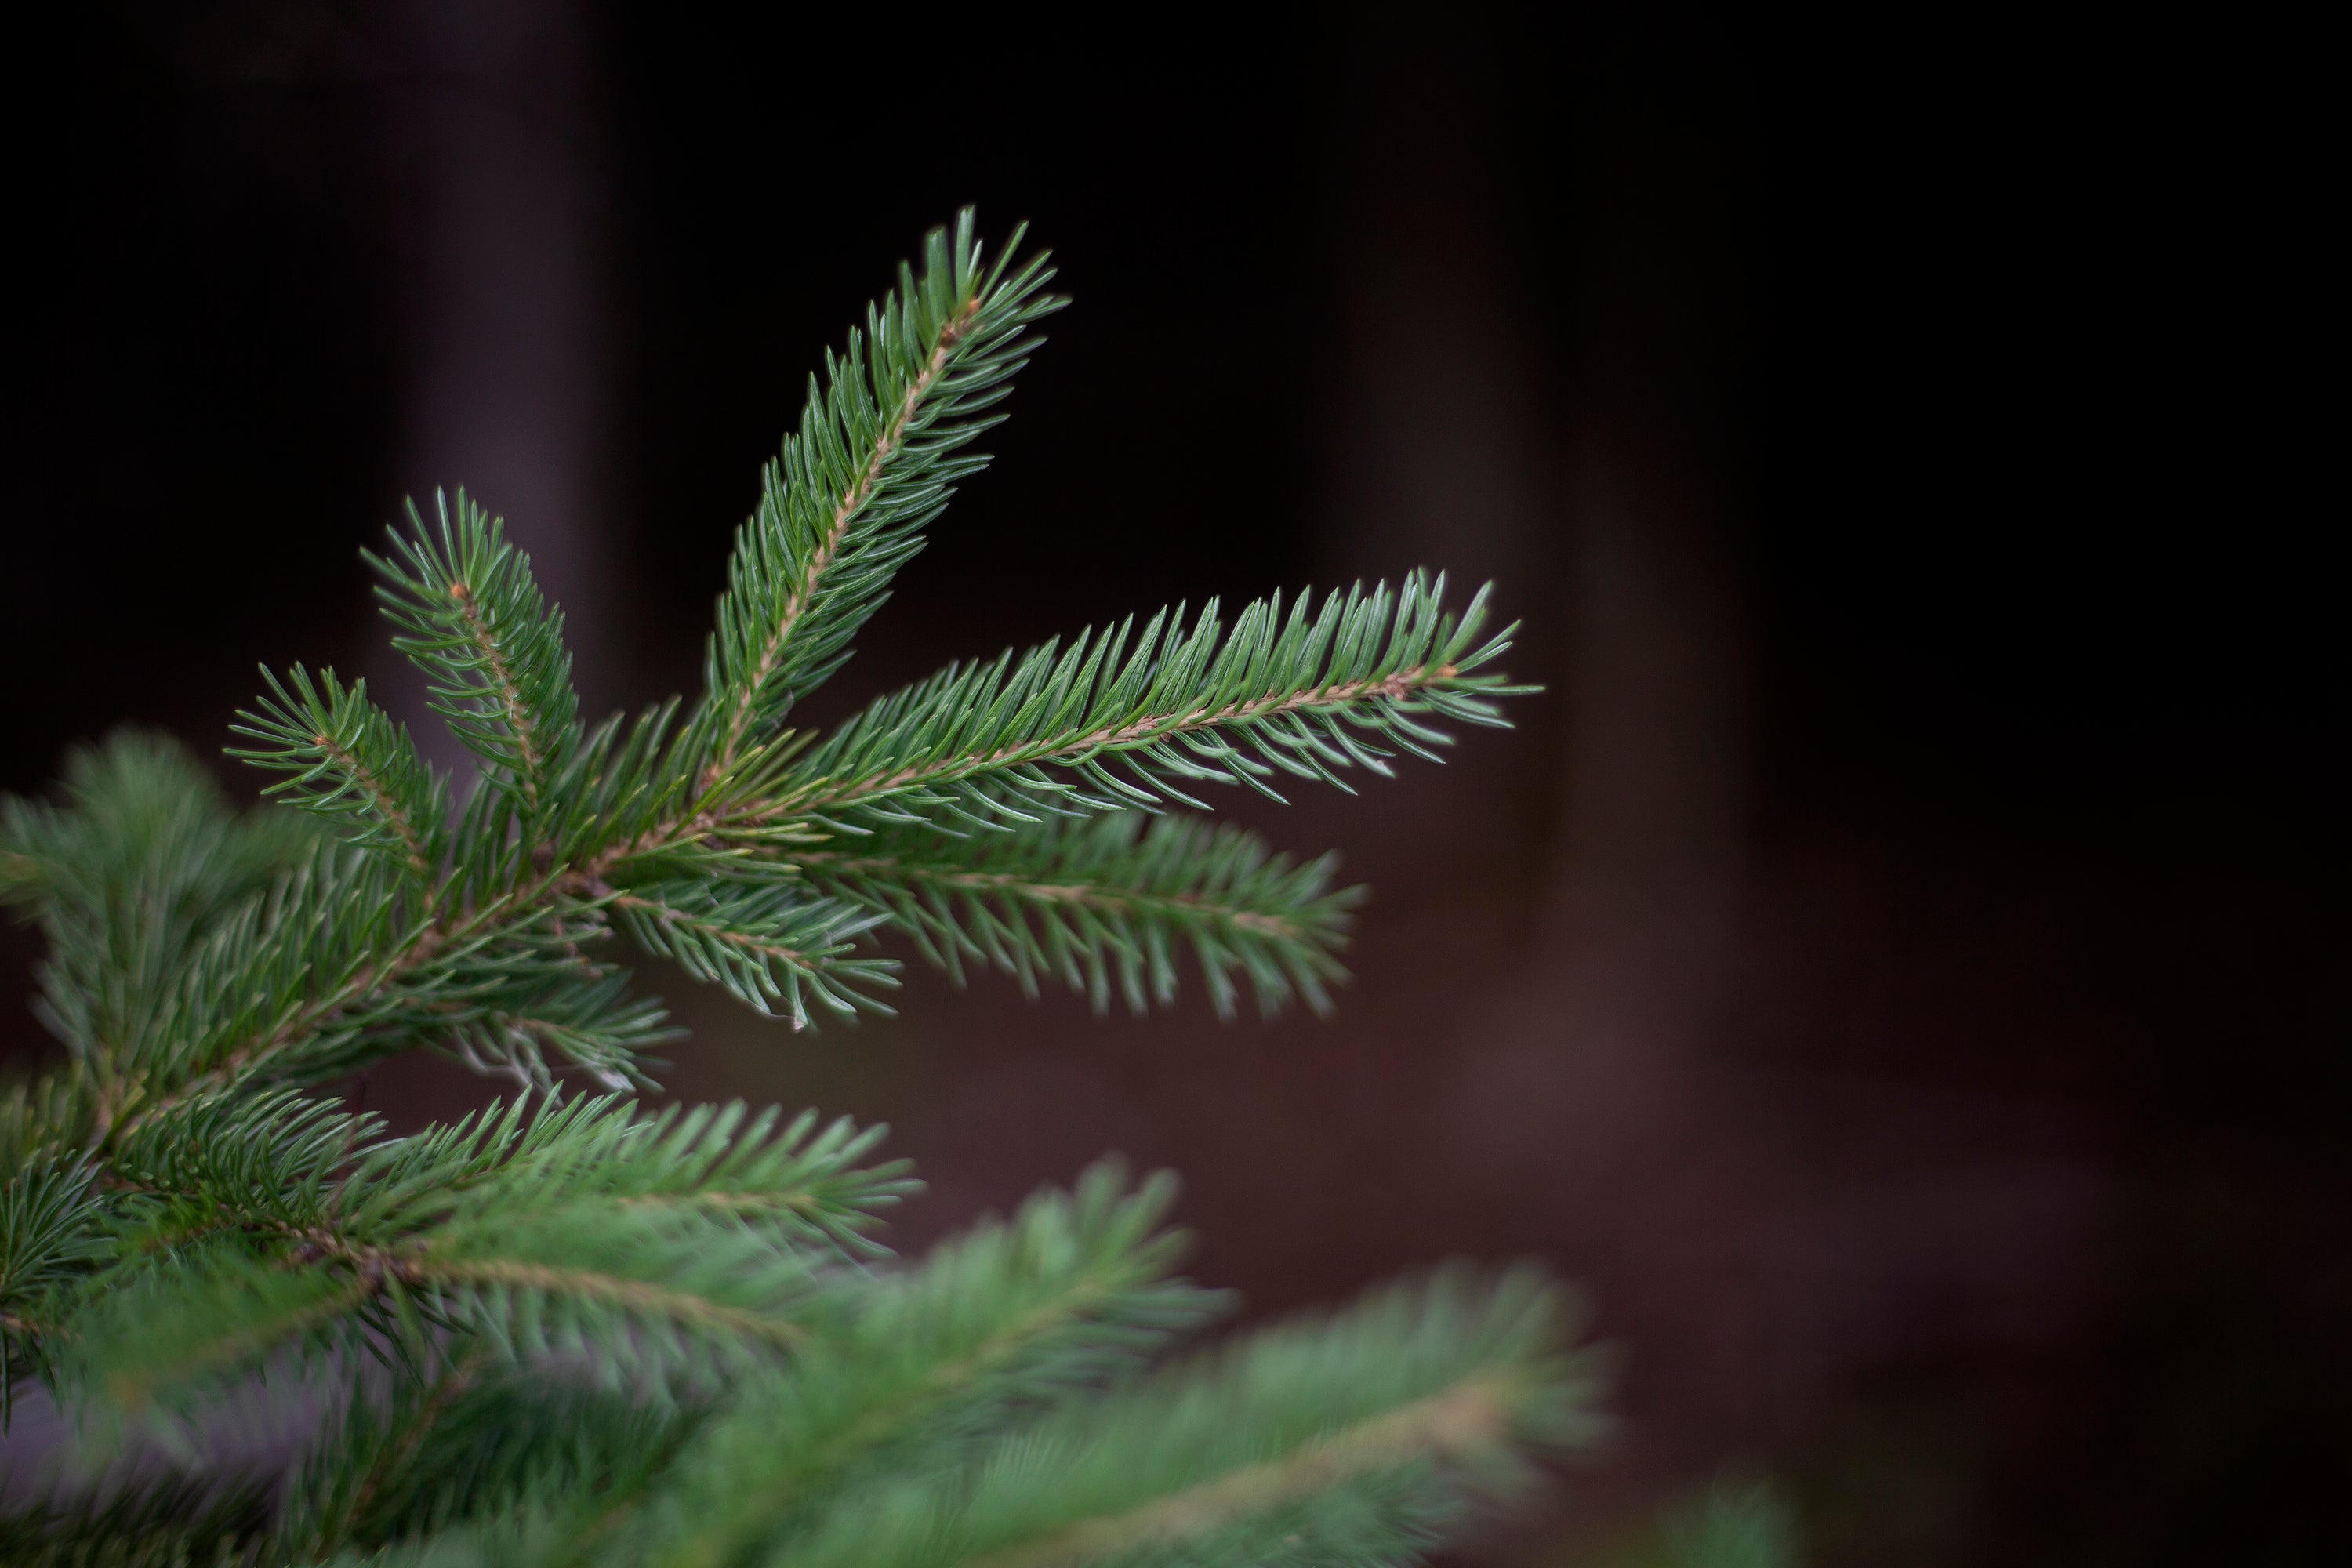 Browse Free HD Images of The Needles On A Pine Branch Against A Green  Background